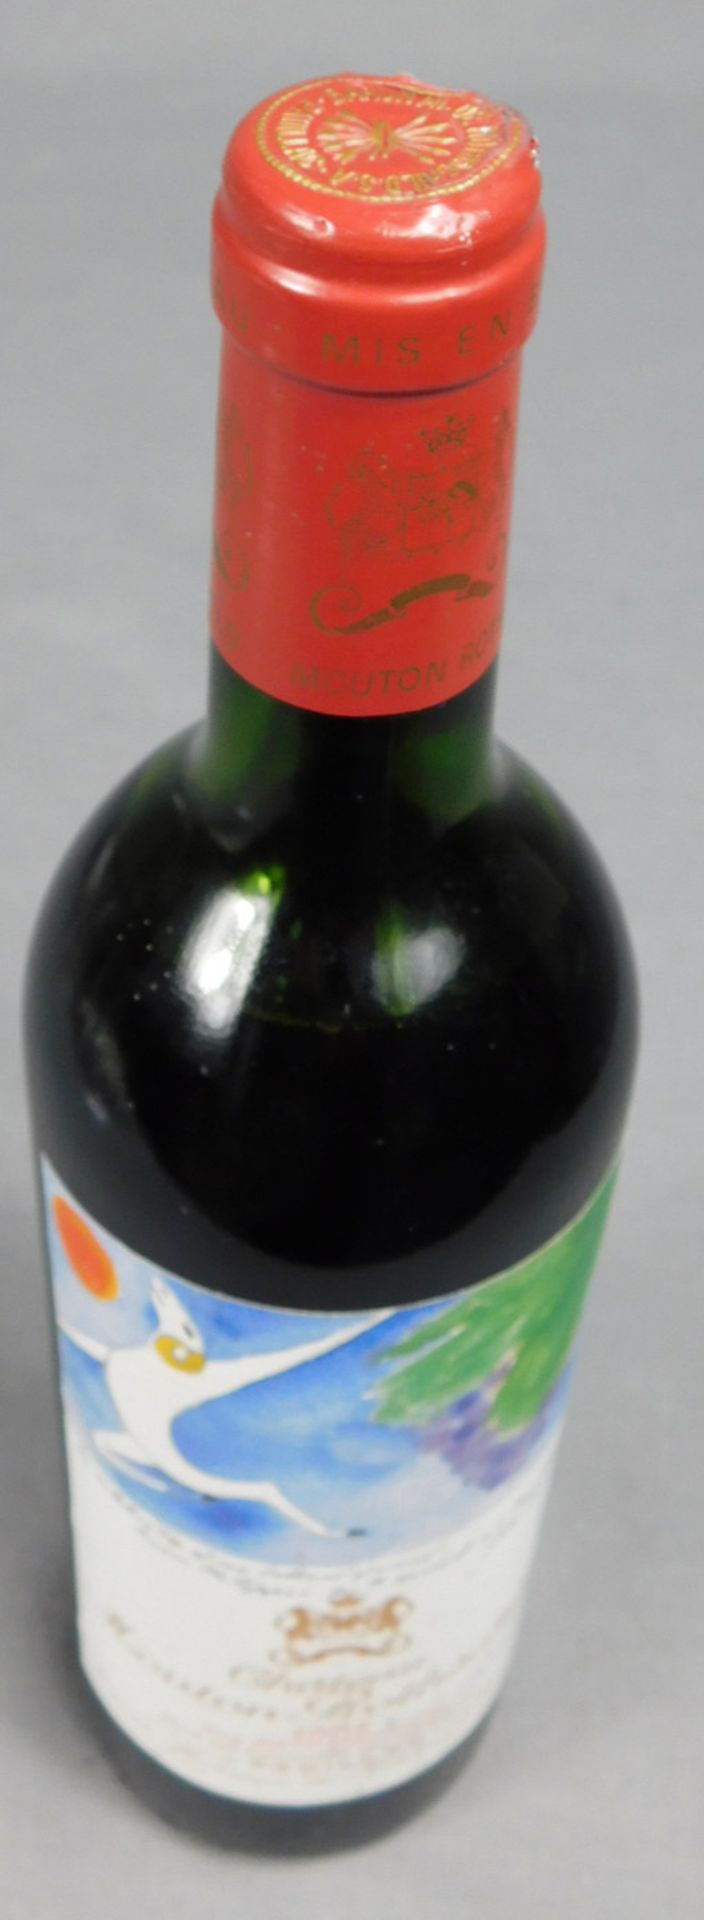 1982 Chateau Mouton Rothschild. 1 ganze Flasche. - Image 5 of 6